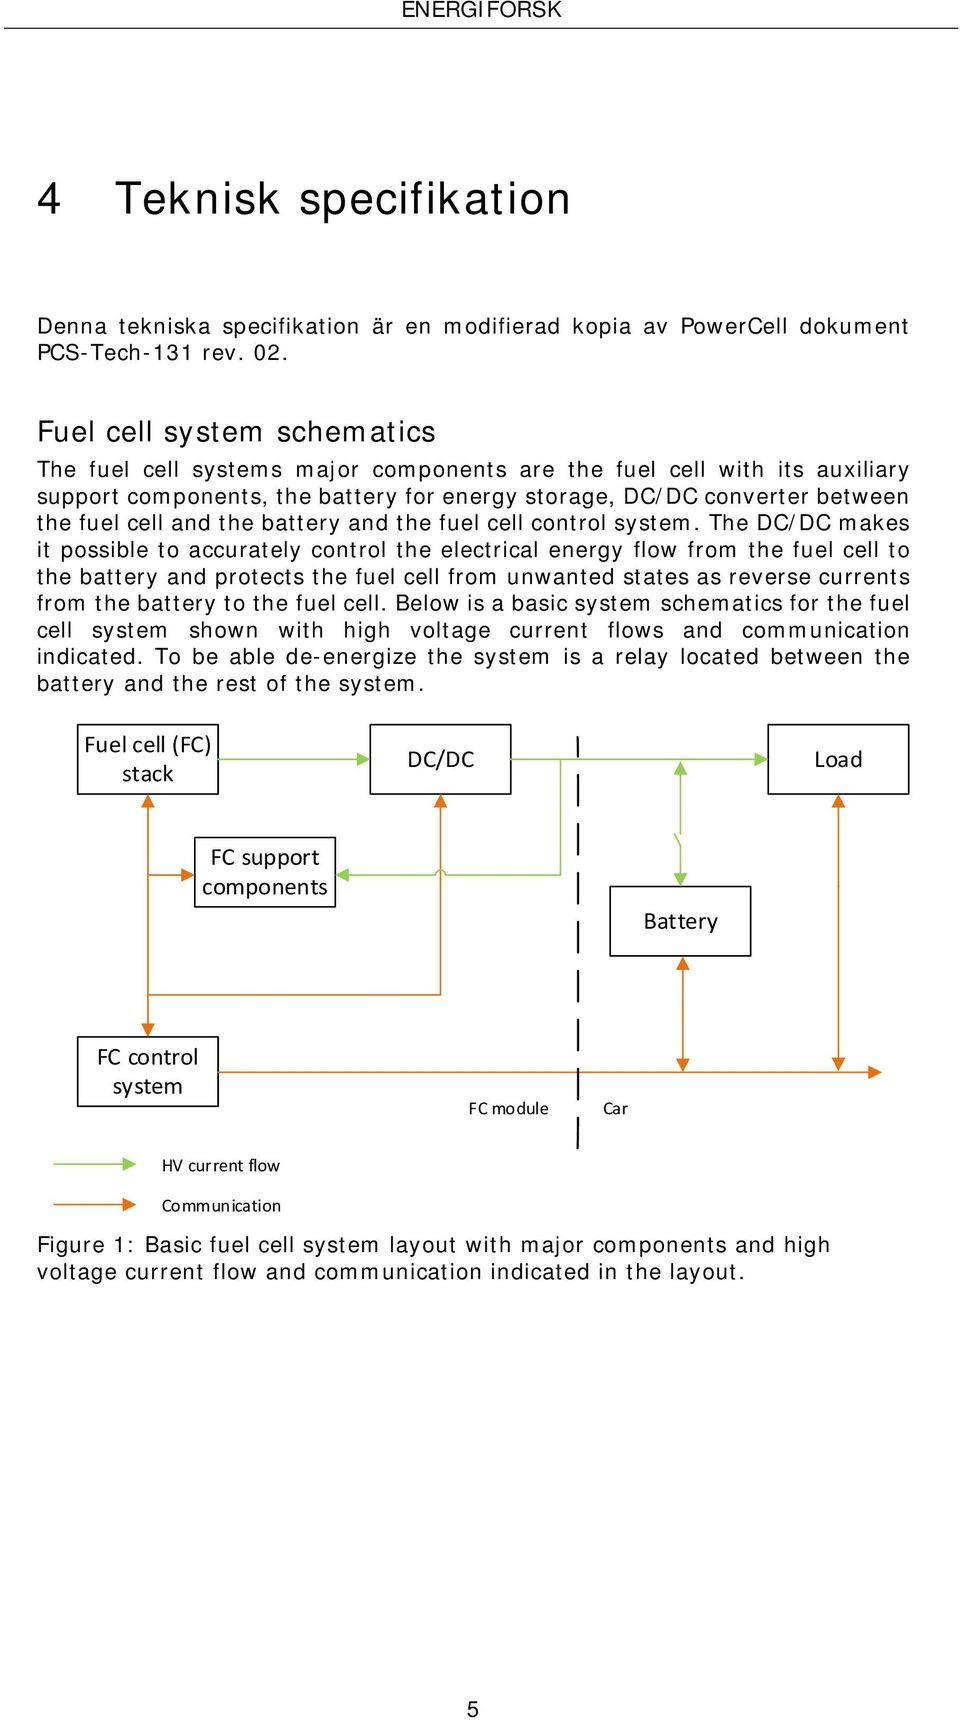 the battery and the fuel cell control system.